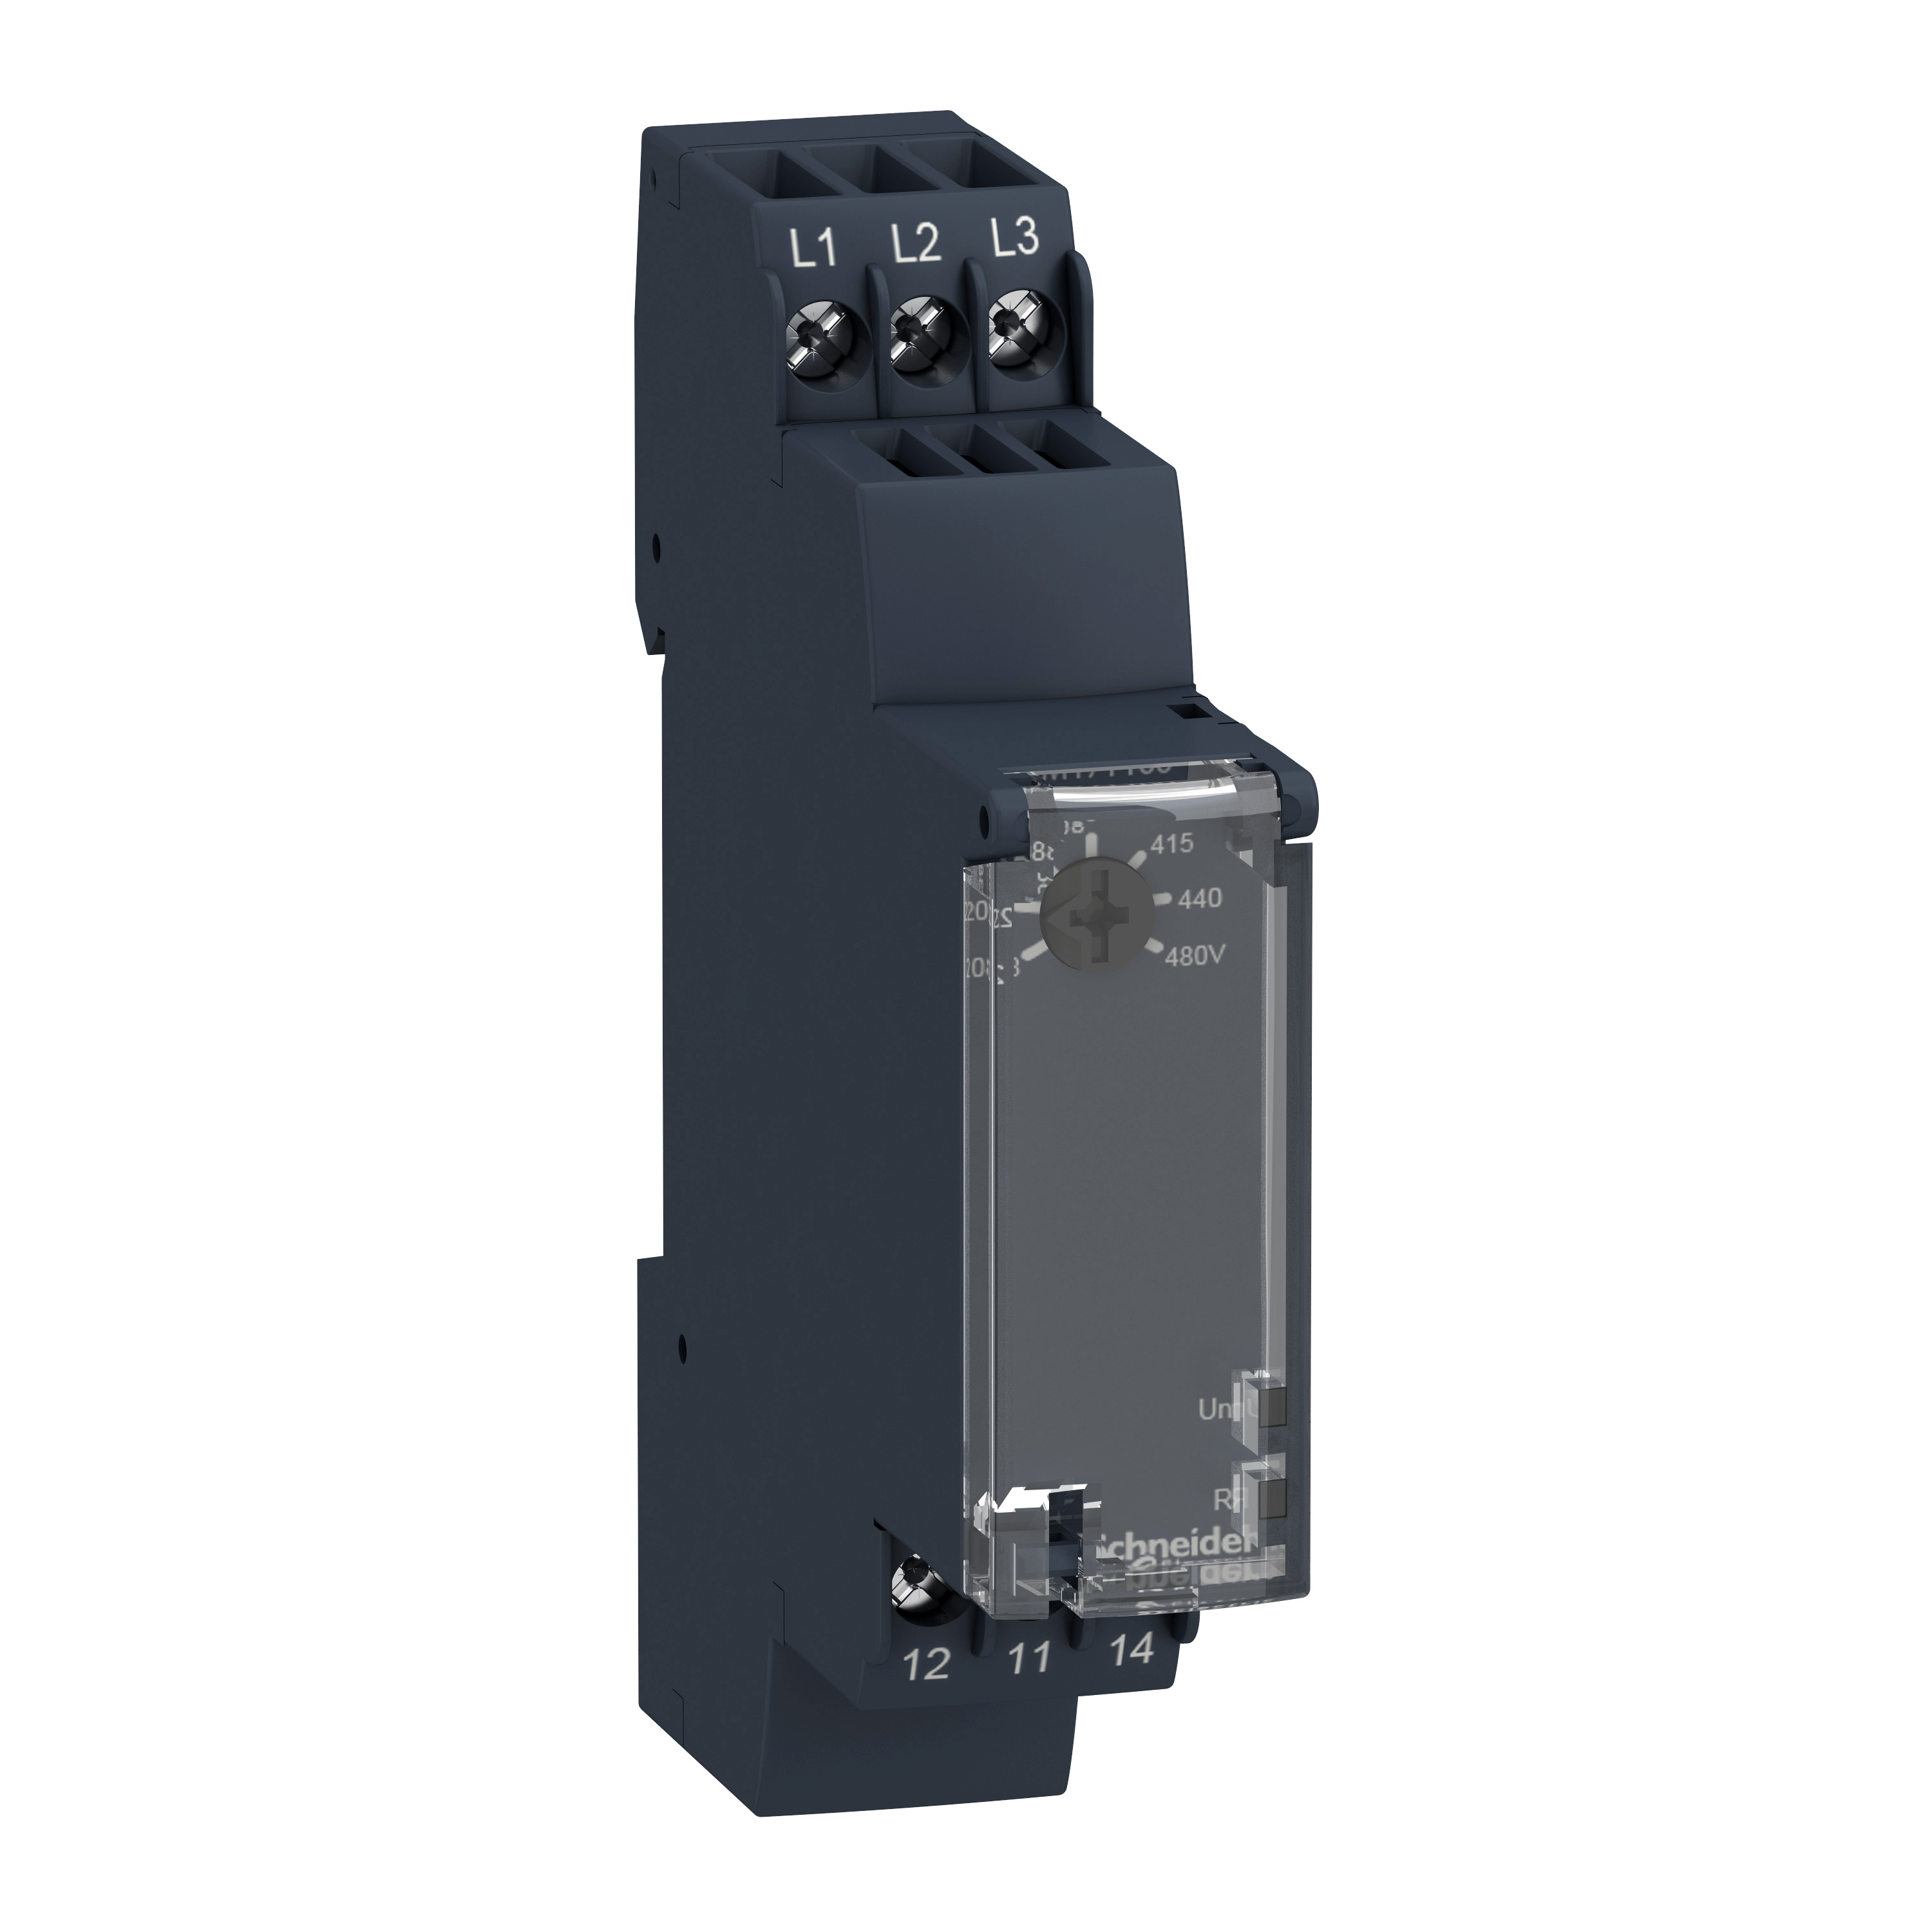 3-phase control relay, Harmony Control Relays, 5A, 1CO, phase failure detection, 208...480V AC